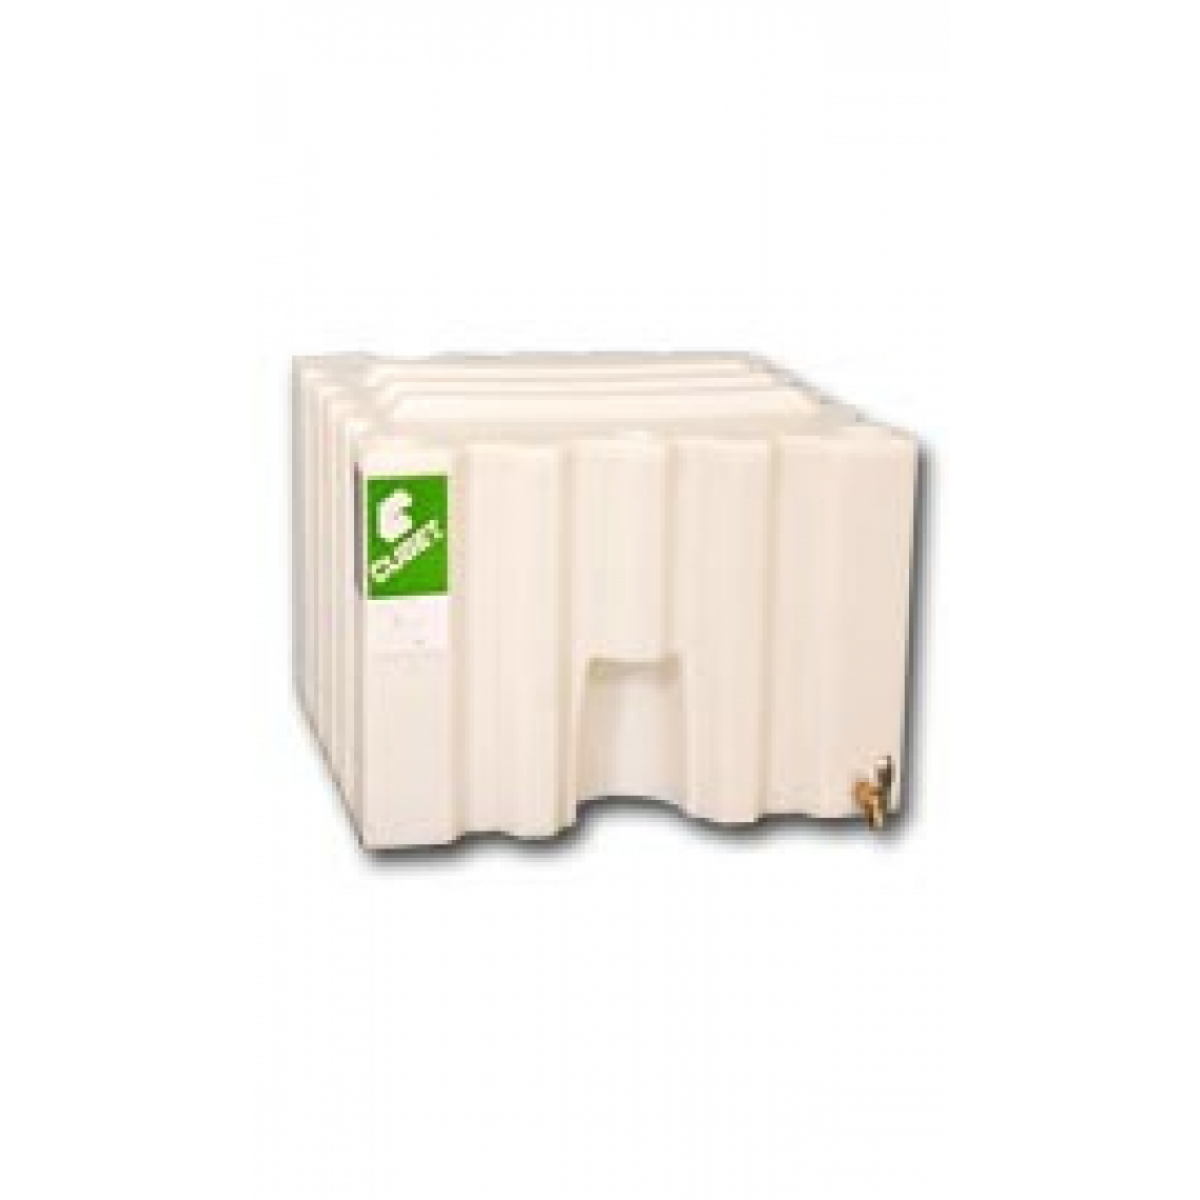 70 Gallon (265 L) Poly Container with 3/4" NPT outlet thread